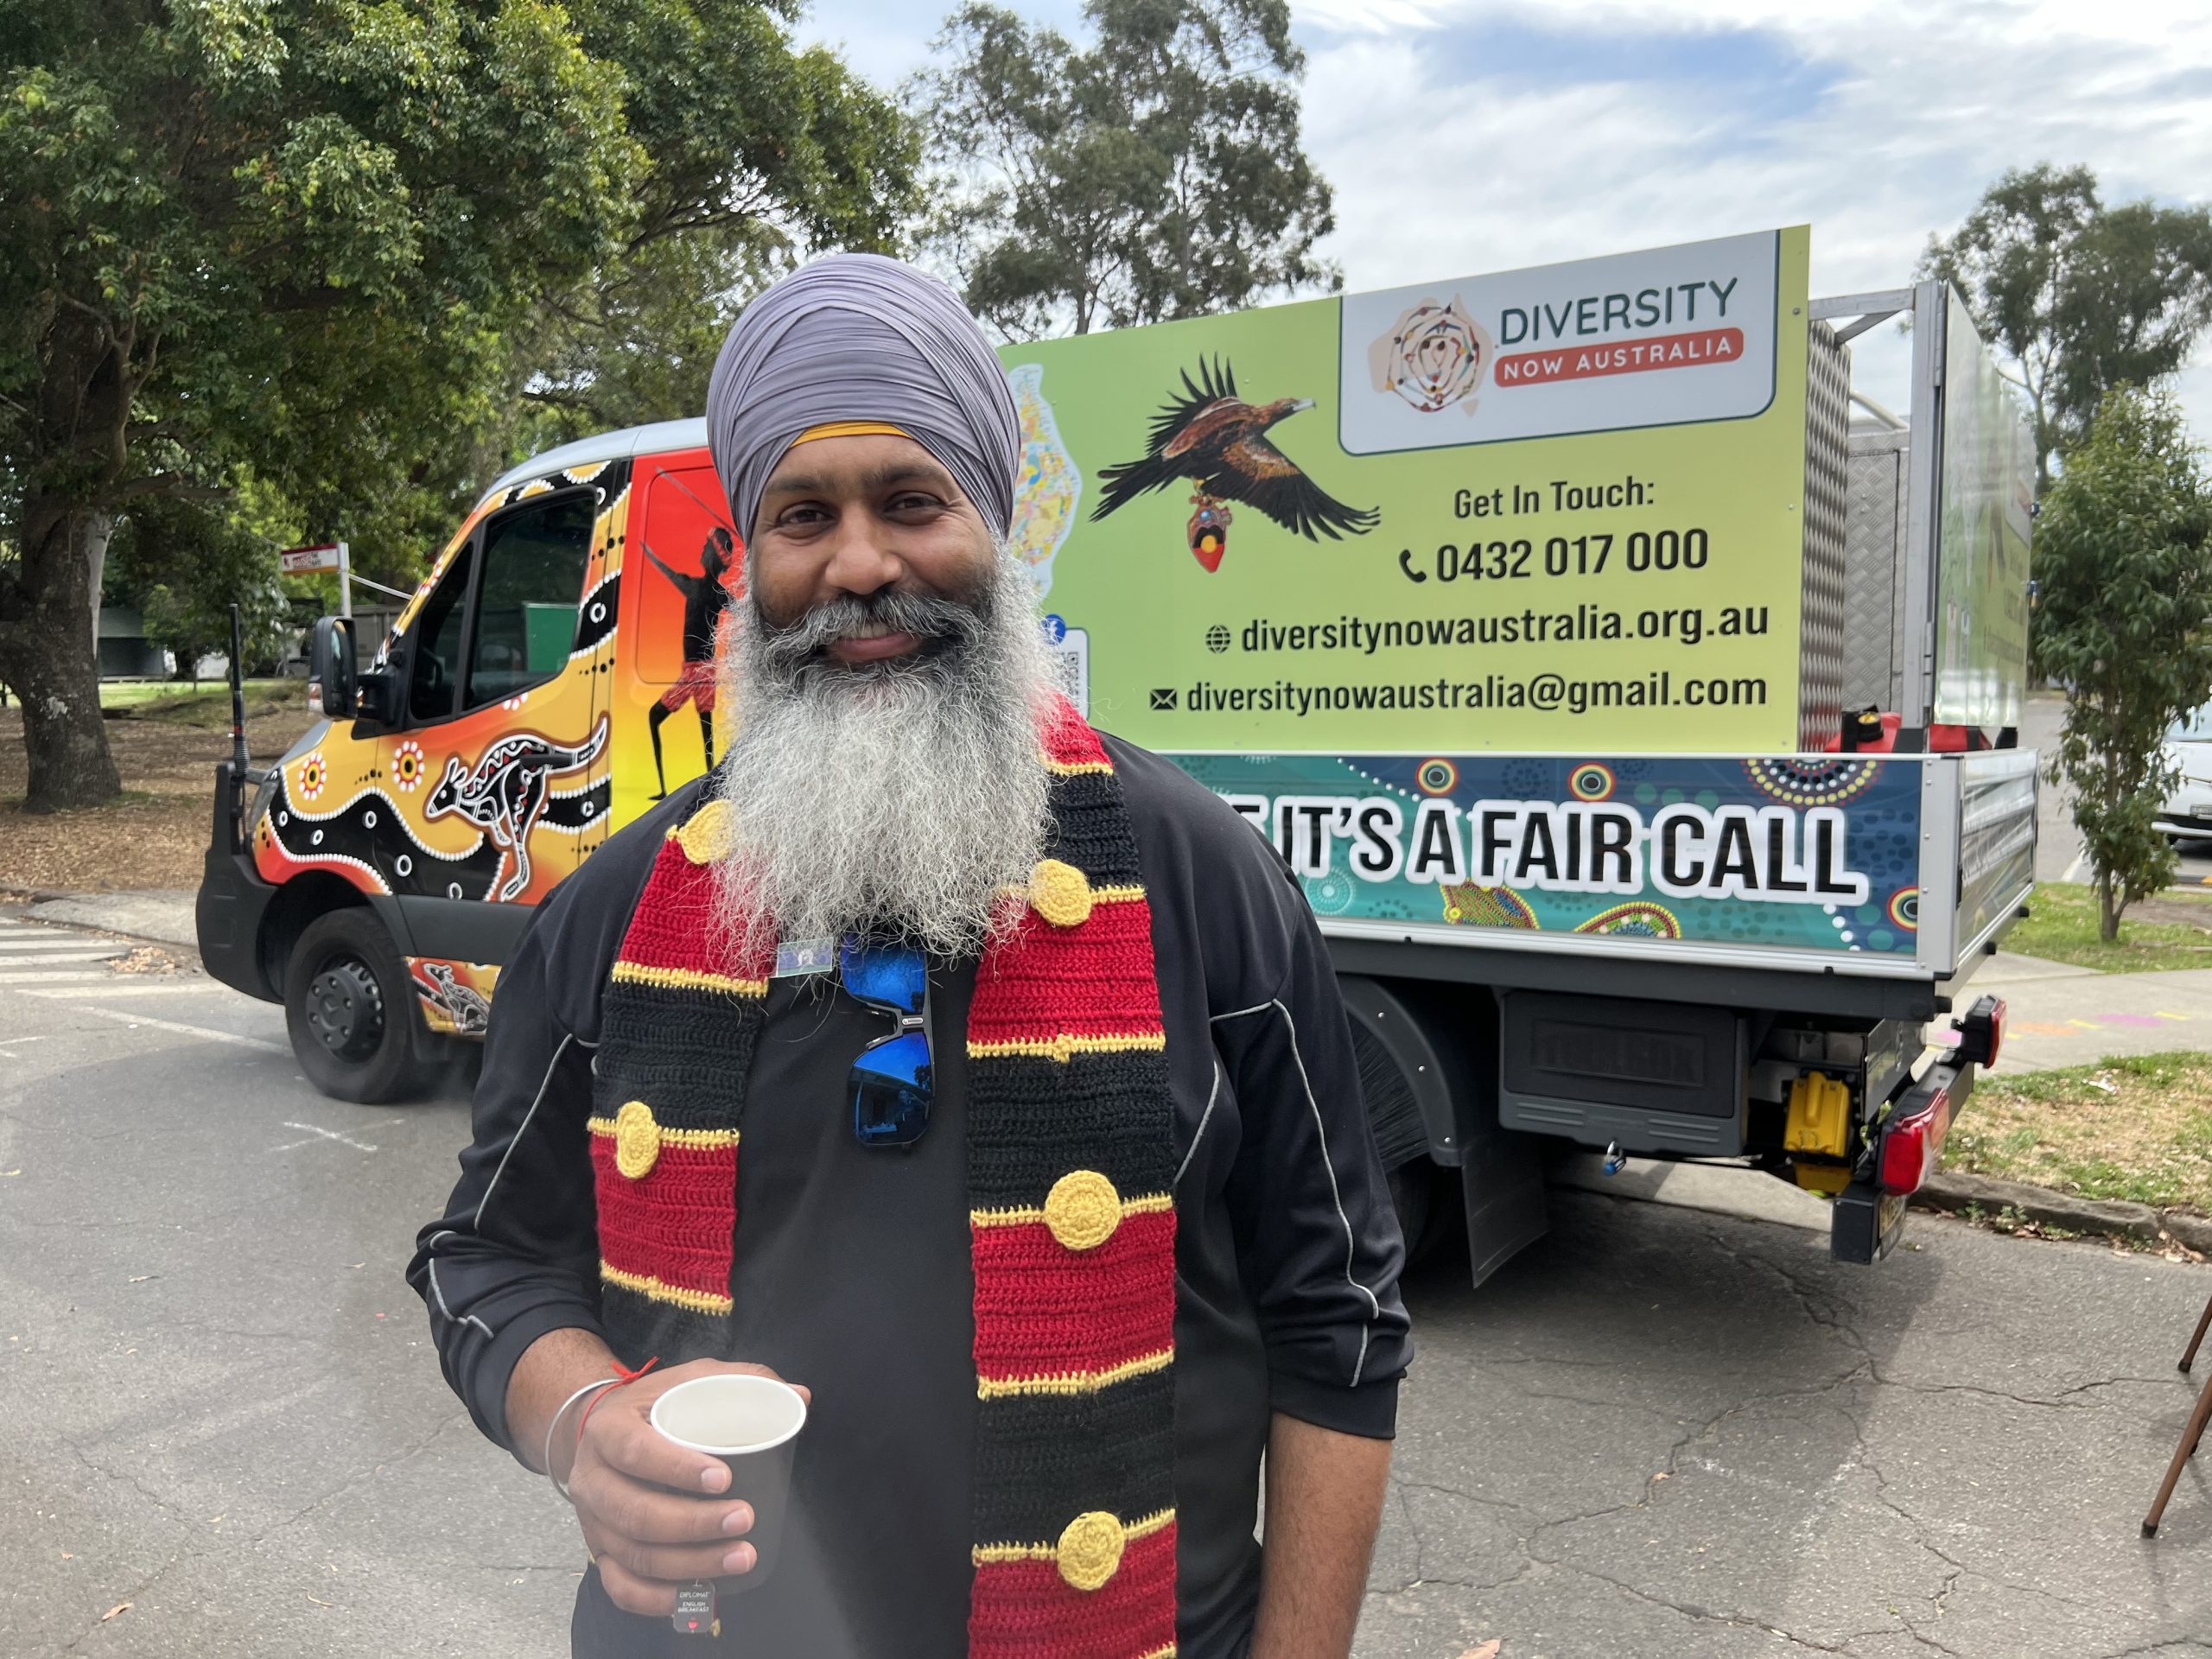 Amar Singh of Turbans4Australia and the truck that took him around the country for The Voice. Photo by Mark Mordue.